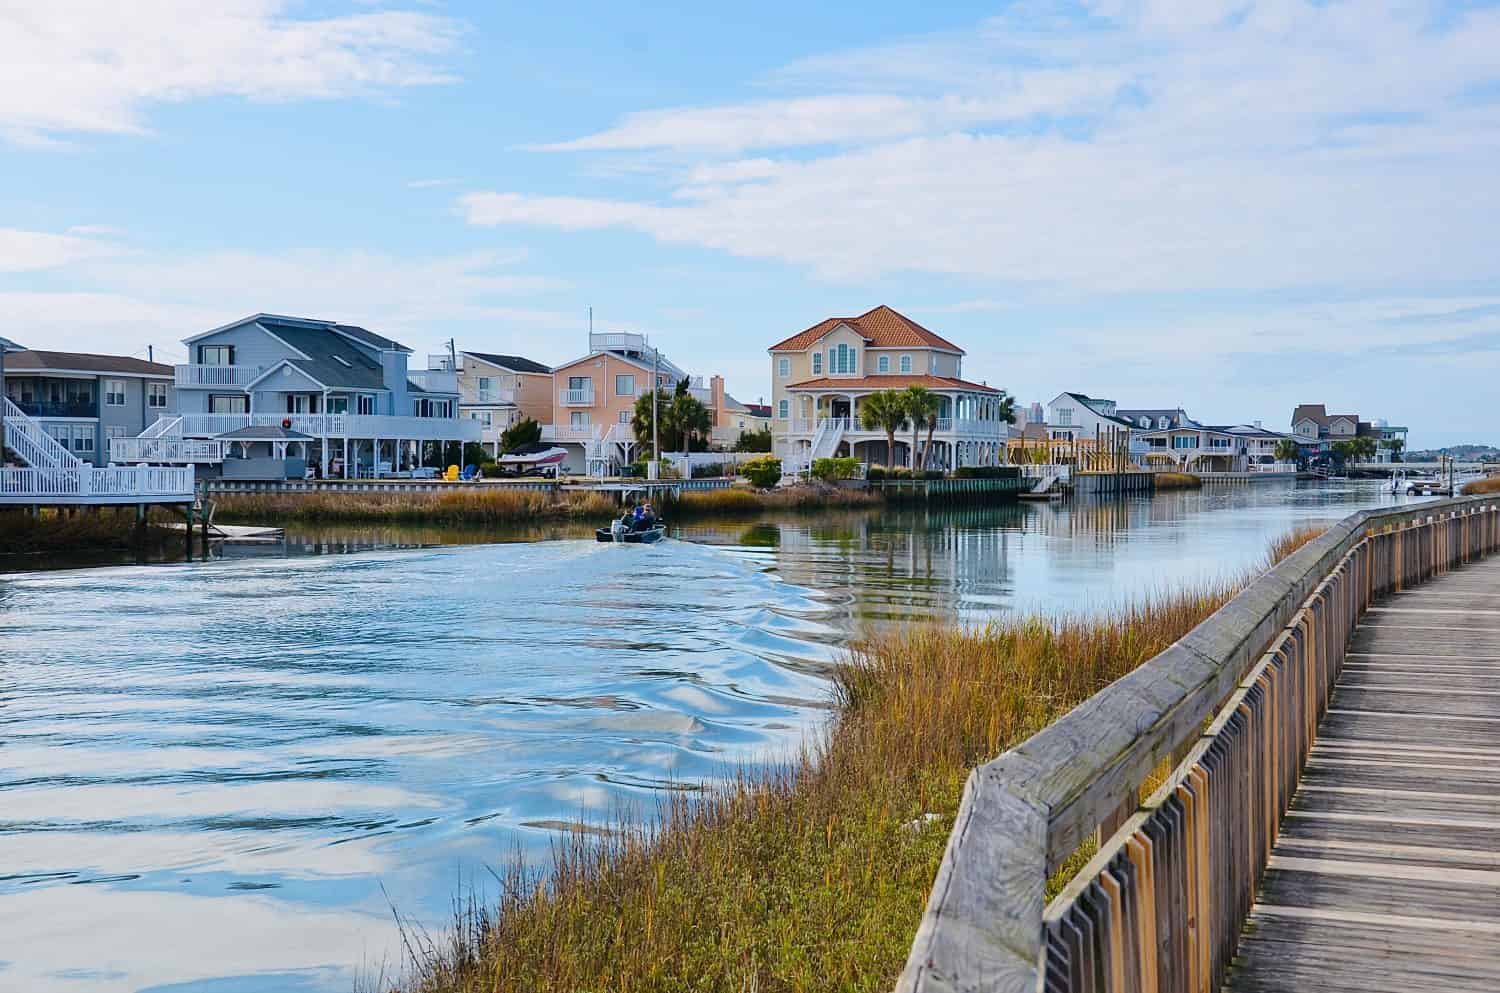 Scenic river view and waterfront houses, in North Myrtle Beach, South Carolina, USA. The wooden boardwalk is located in the Heritage Shores Nature Preserve, a walking trail through the salt marsh.